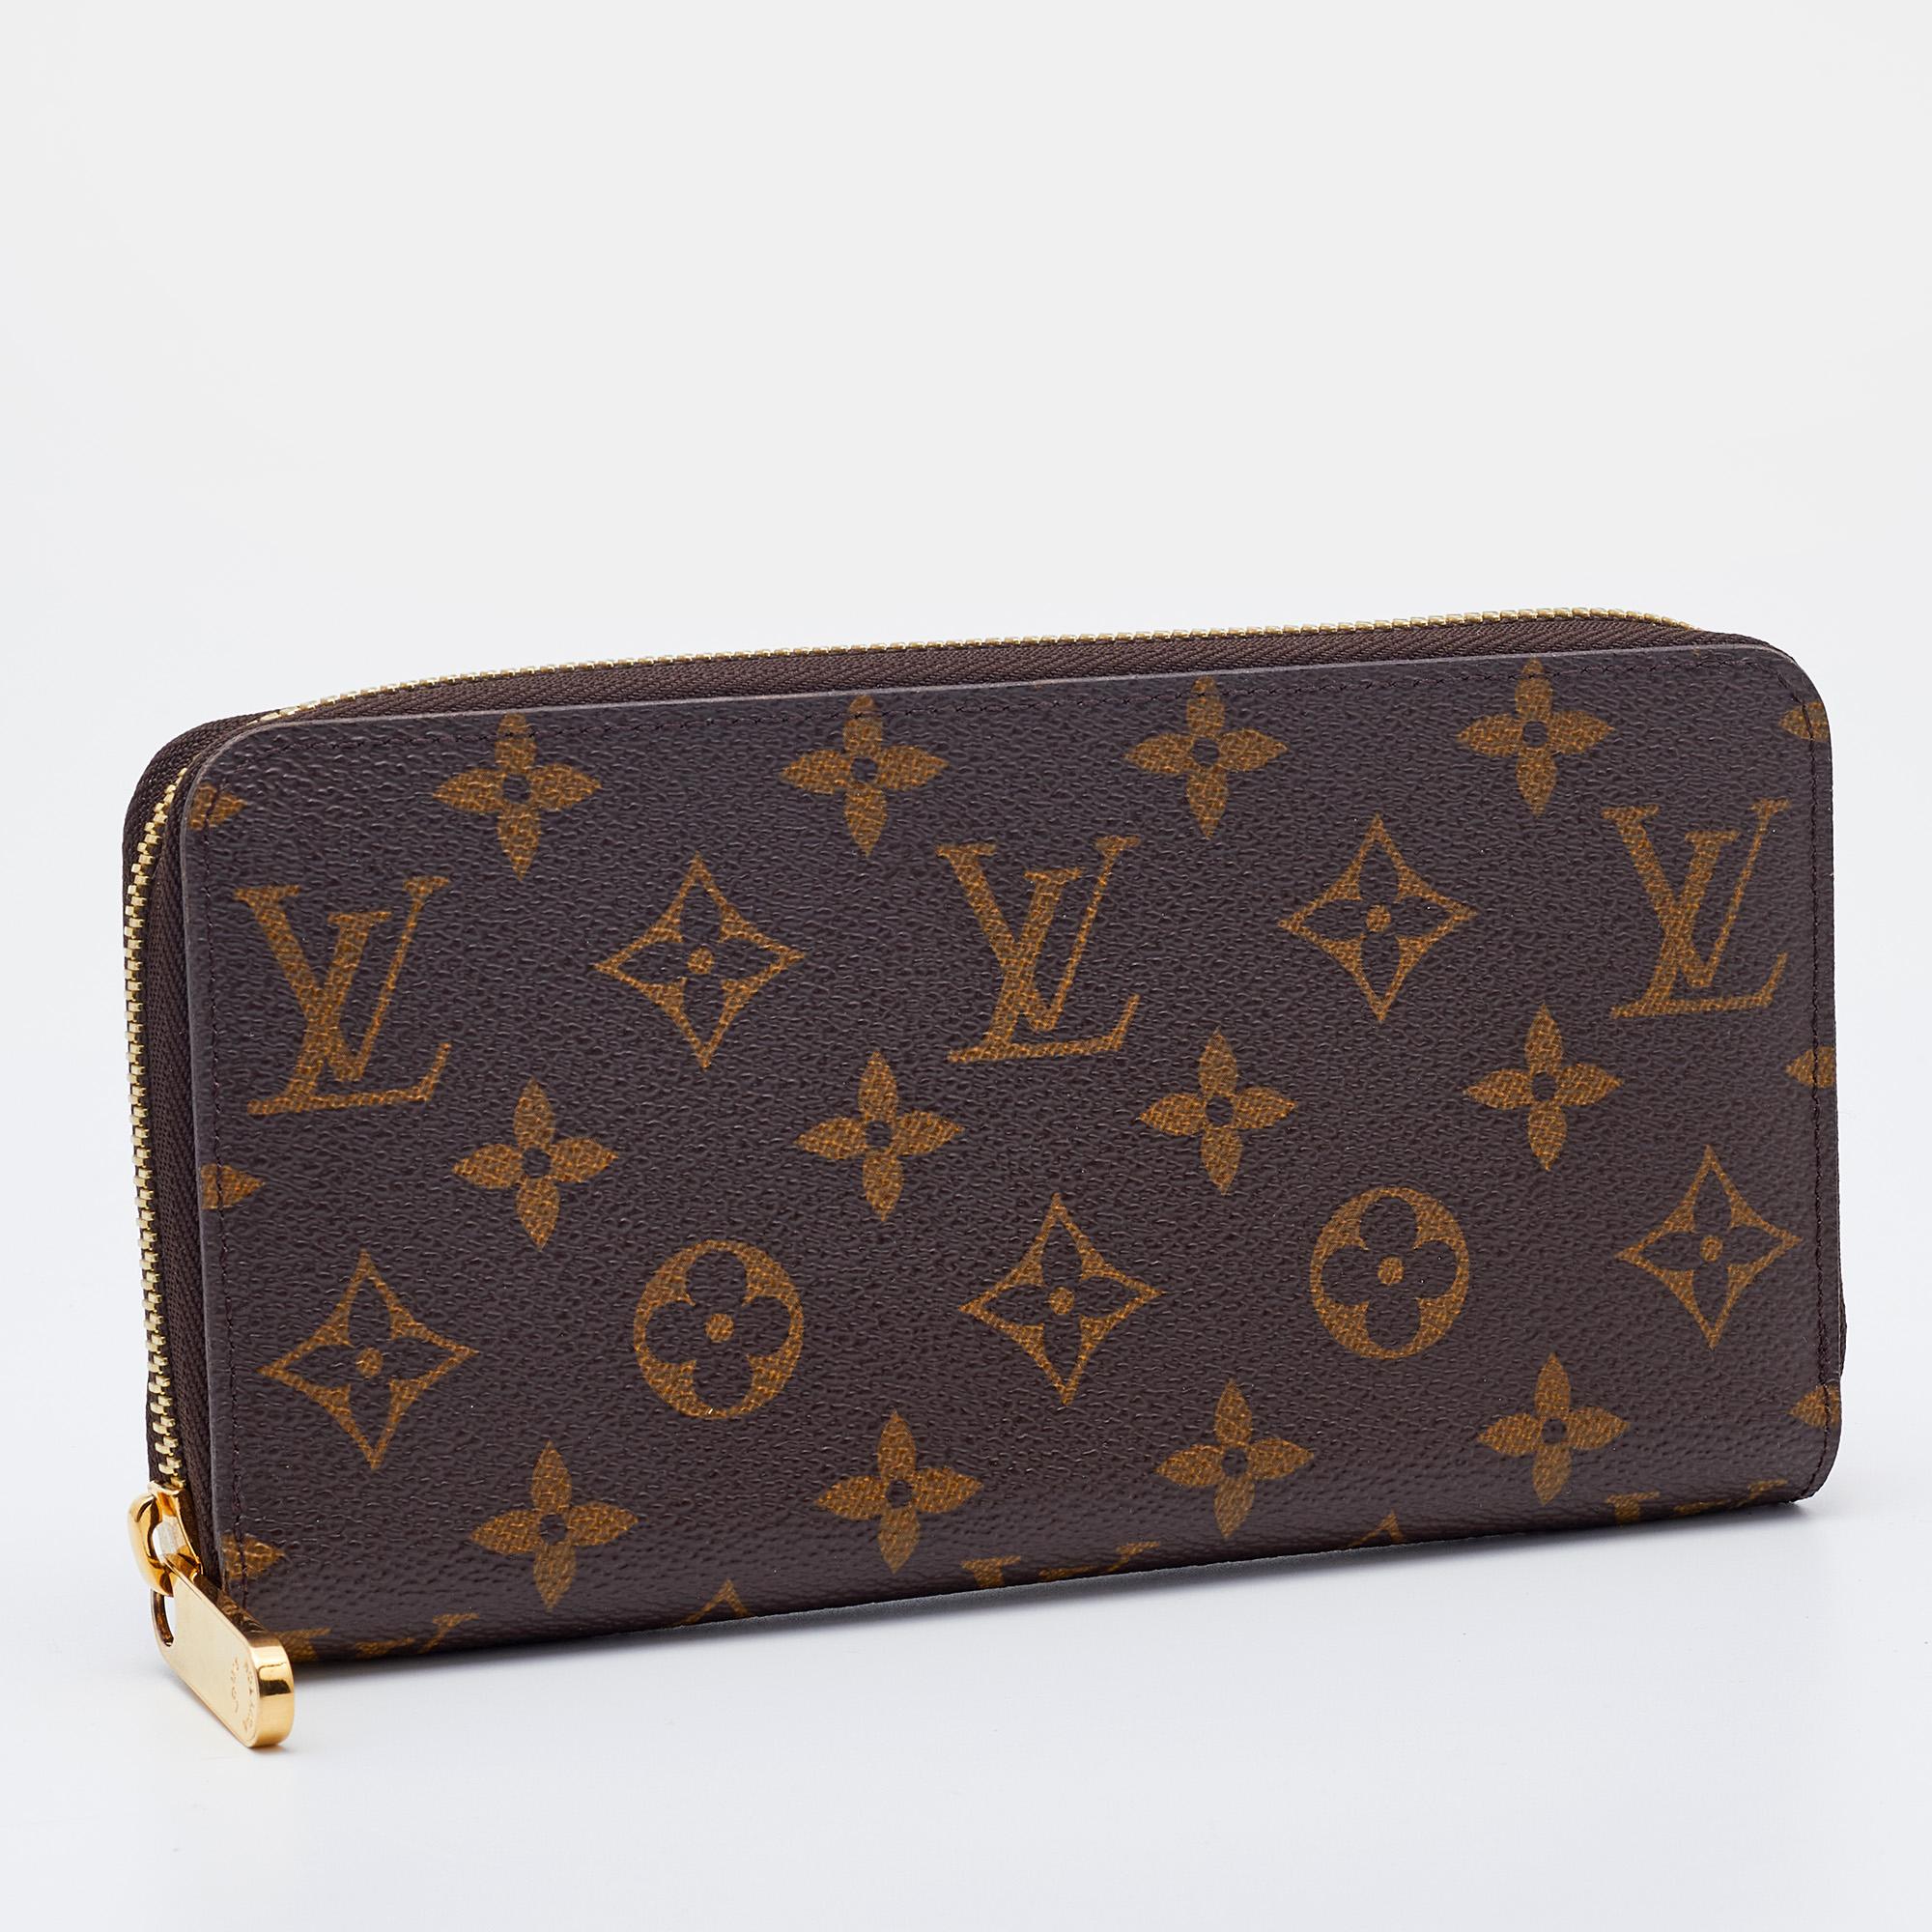 This Louis Vuitton Zippy wallet is conveniently designed for everyday use. Crafted from Monogram Canvas, the wallet has a zipper closure that opens to reveal multiple slots and leather-lined compartments to arrange your daily necessities